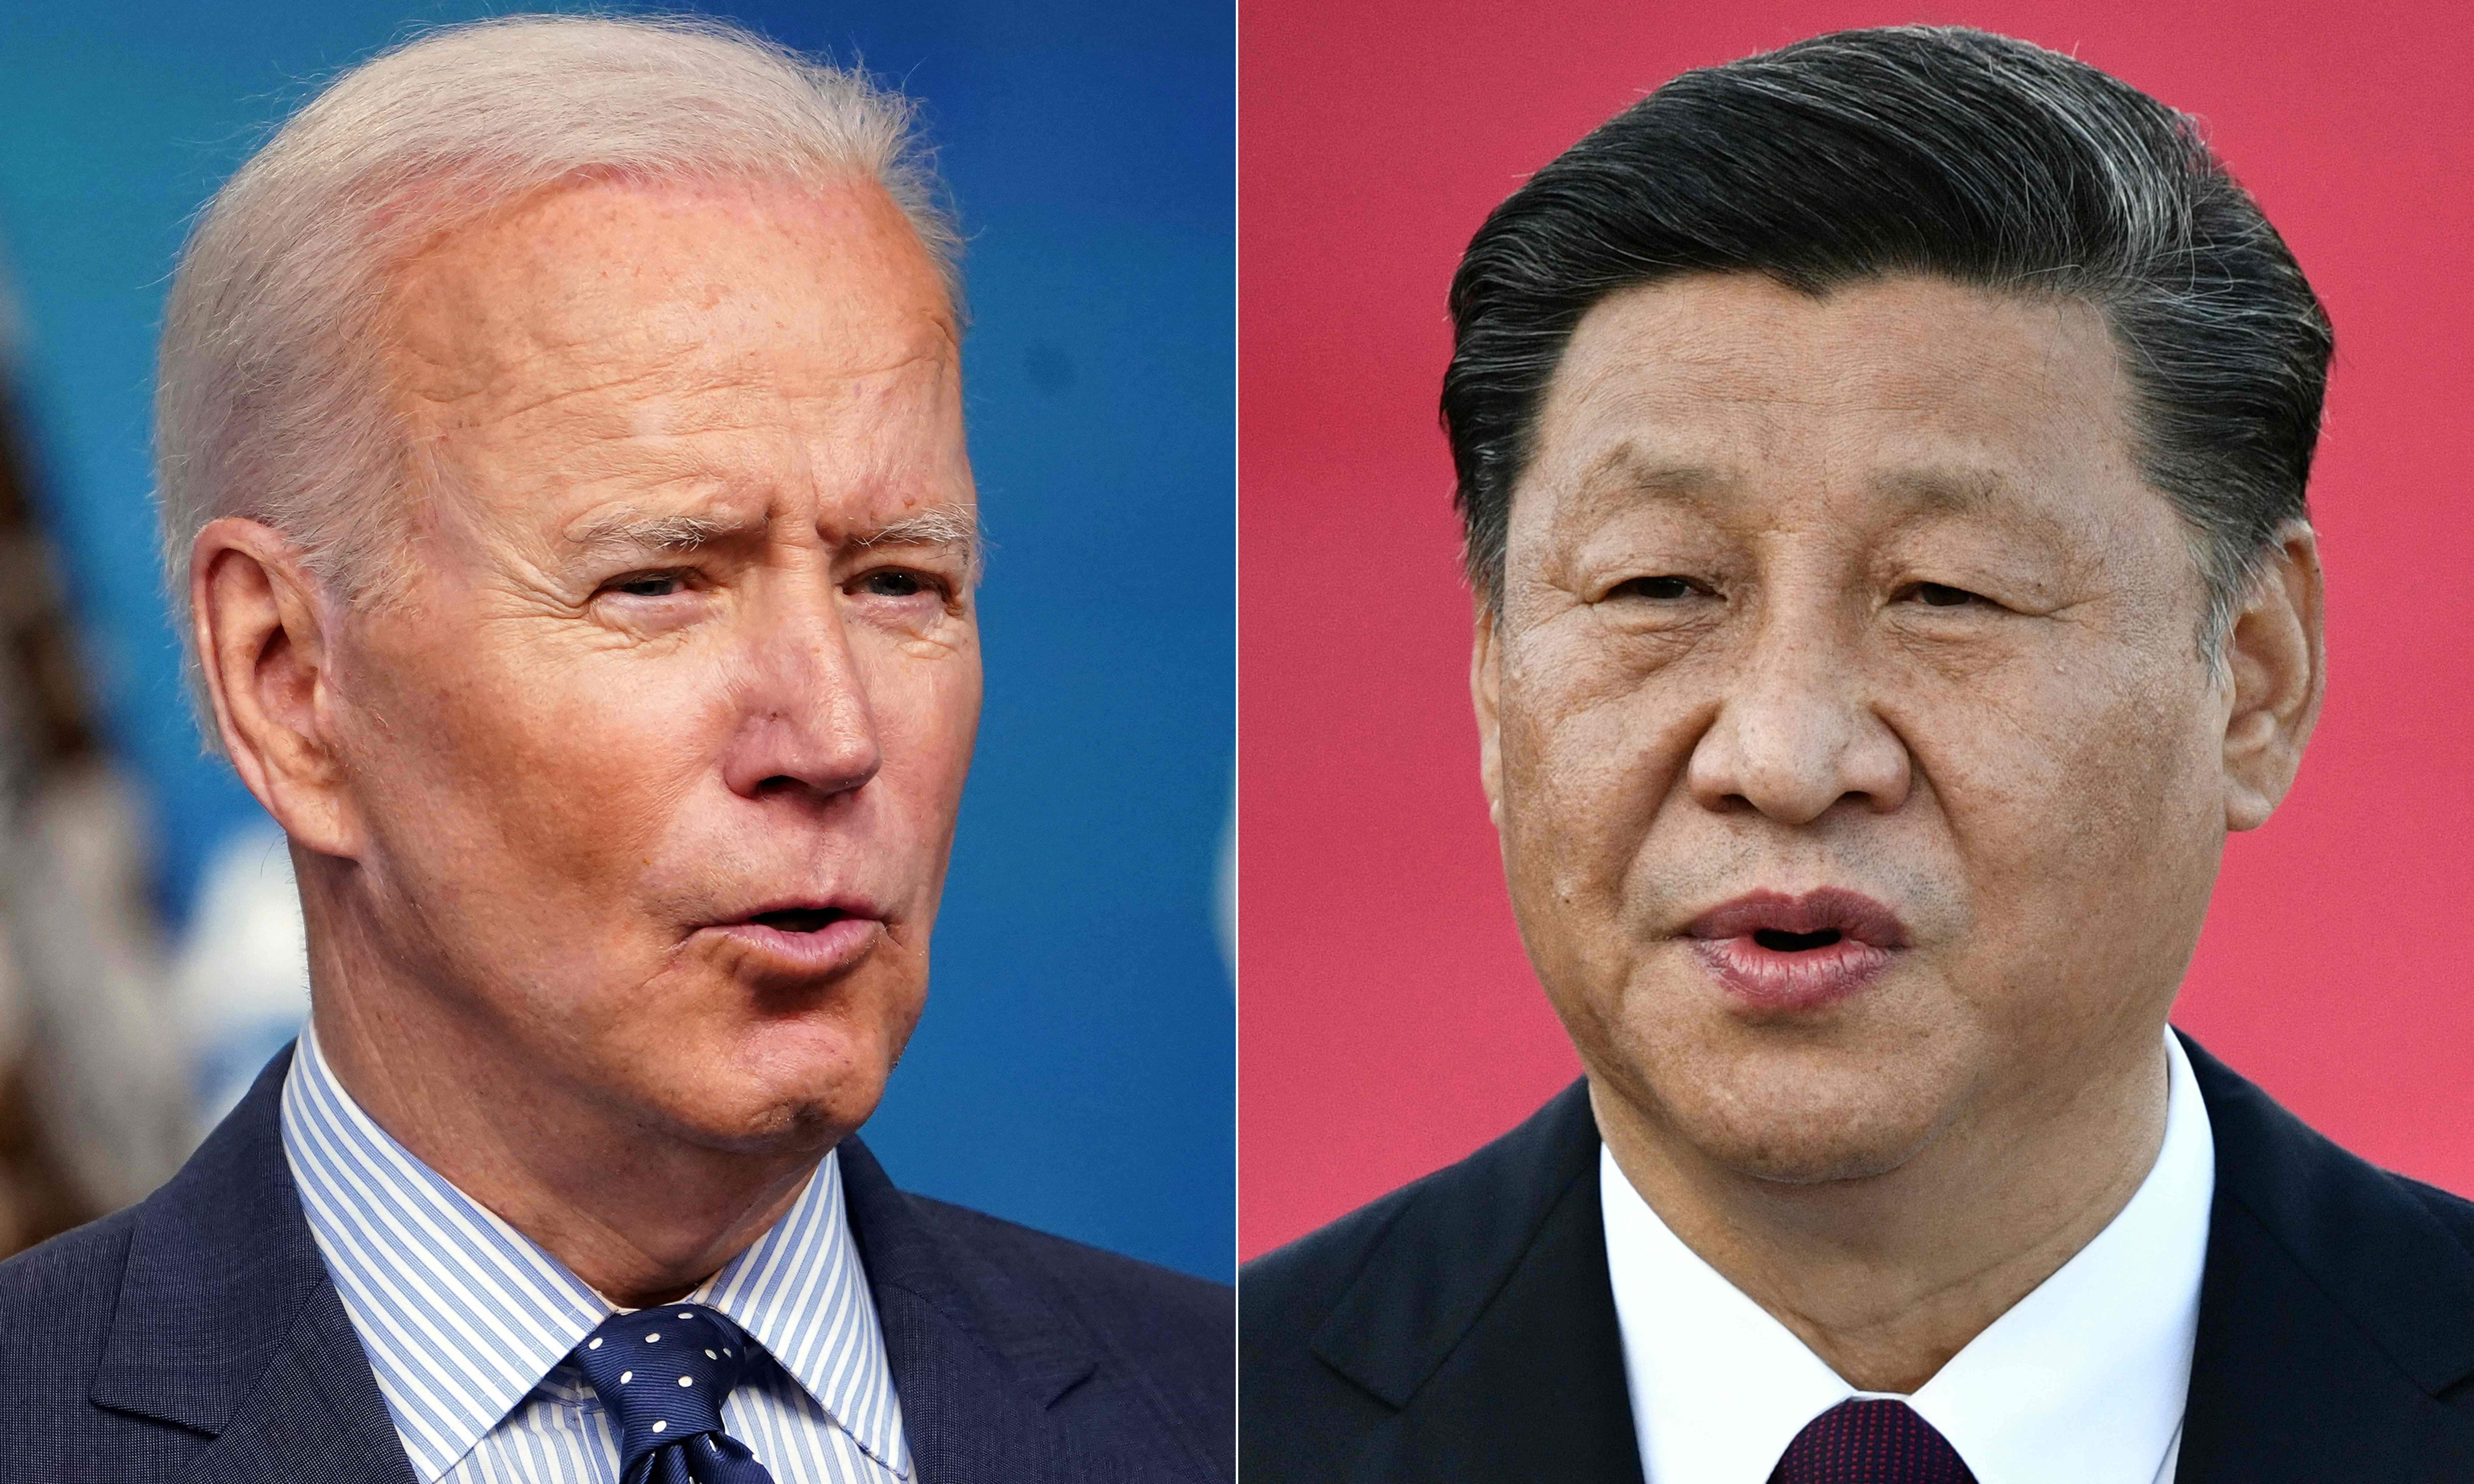 US President Joe Biden and Chinese President Xi Jinping are expected to attend the Apec forum virtually this week. Host New Zealand wants to keep the focus on a practical response to the pandemic and climate threats. Photos: AFP